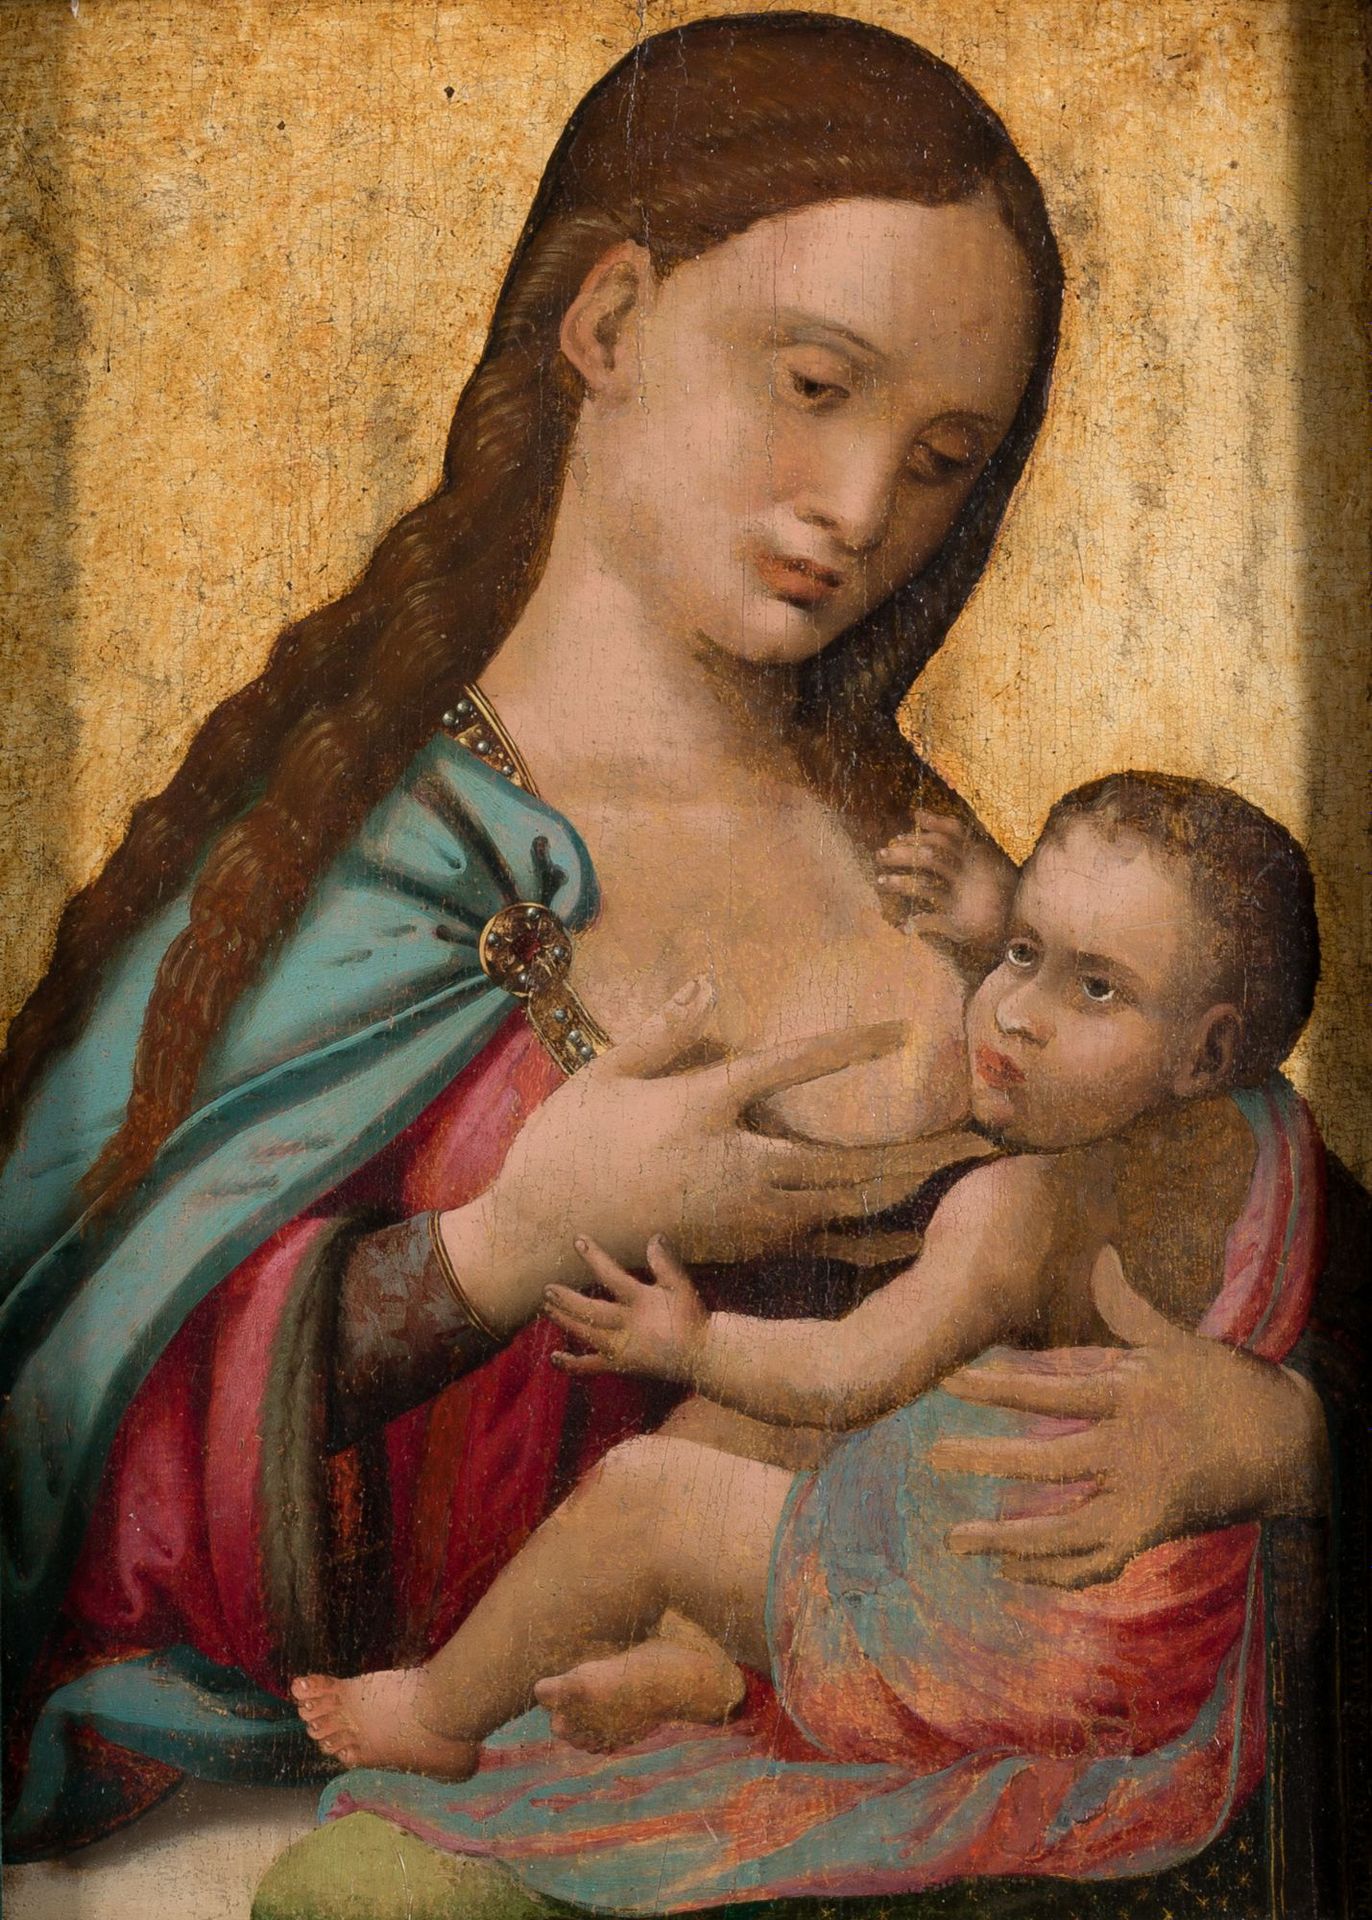 FERNANDO LLANOS (Ca. 1470 / Ca. 1525) "The virgin and Child" Together with Ferna&hellip;